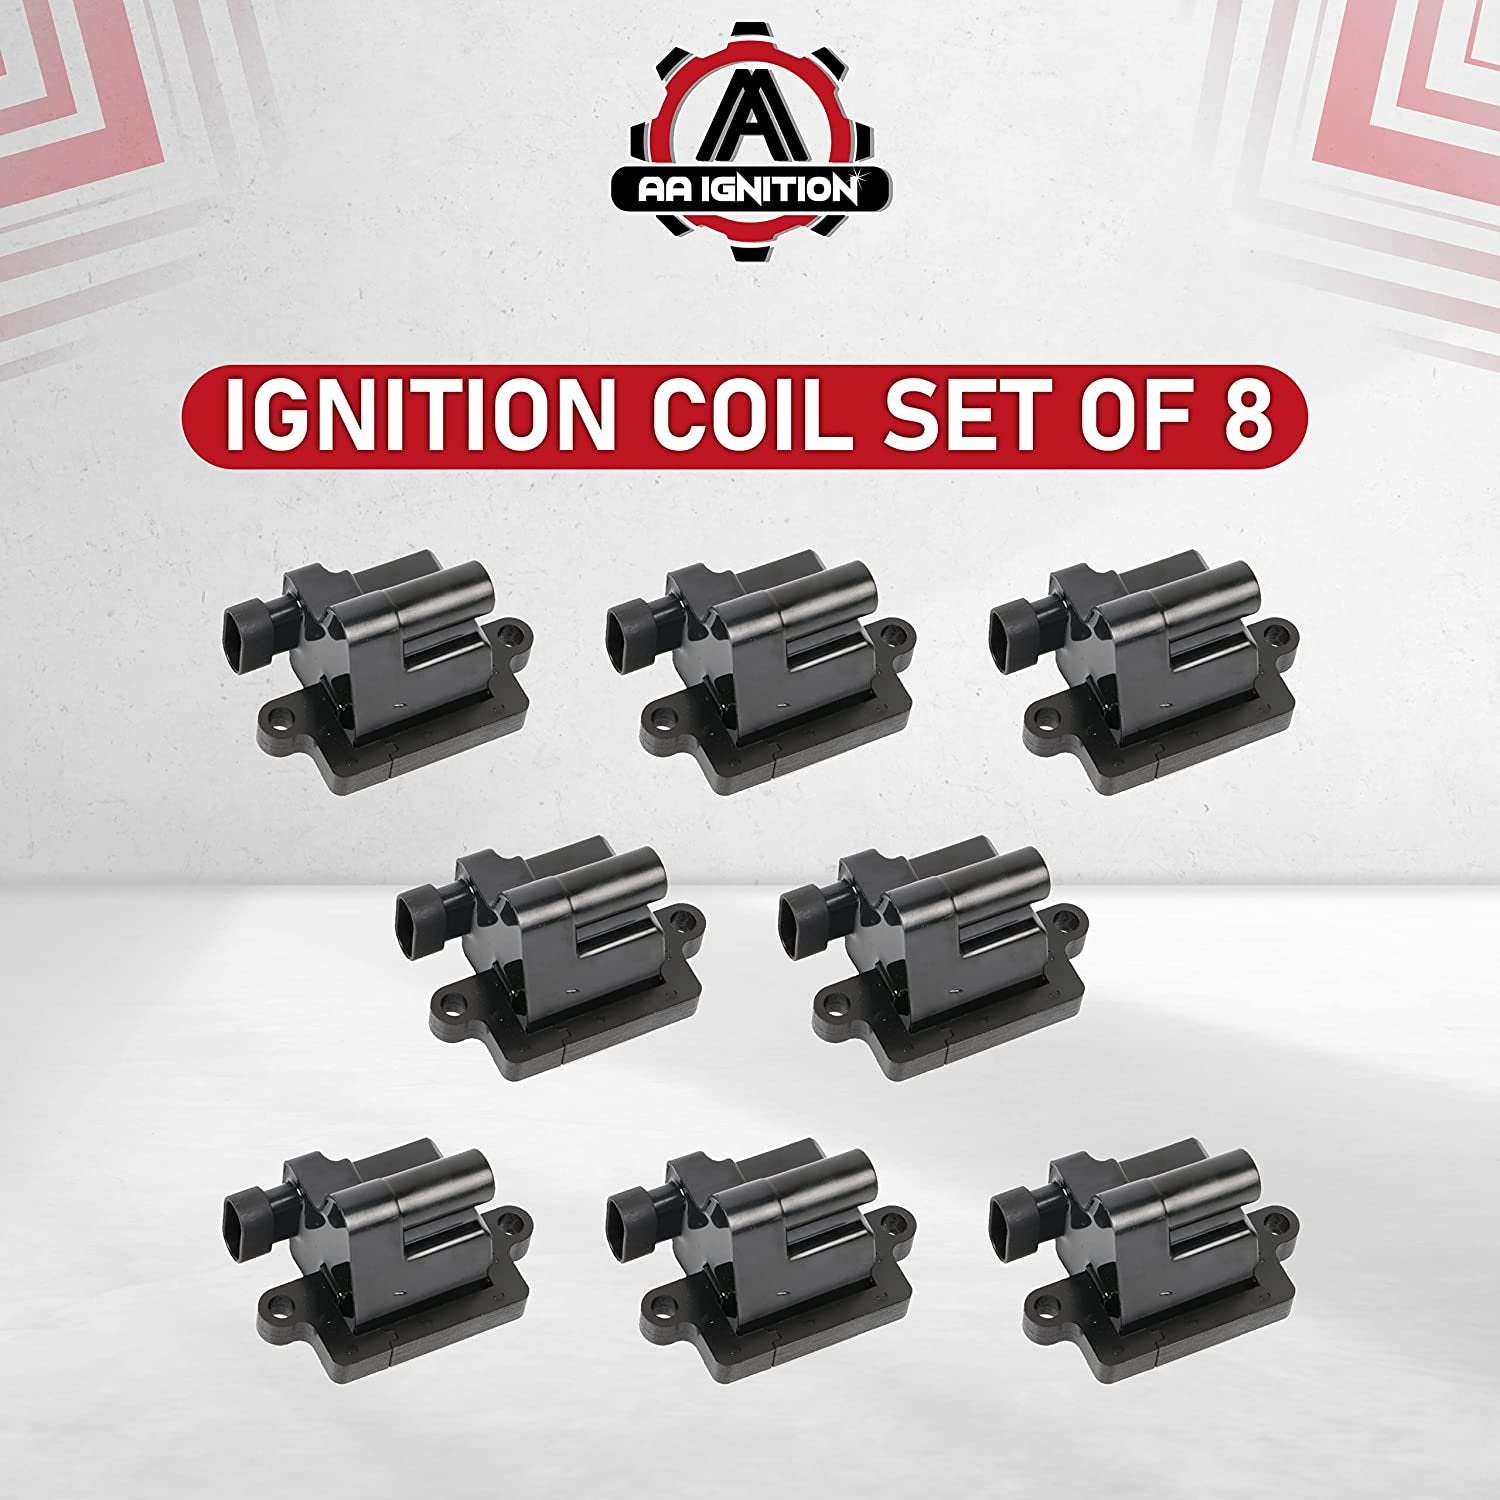 Set of 8 Ignition Coils for Cadillac/Chevy/GMC - Replace OE #12558693 - Compatible with Escalade, Silverado, Tahoe, Yukon - Free Shipping